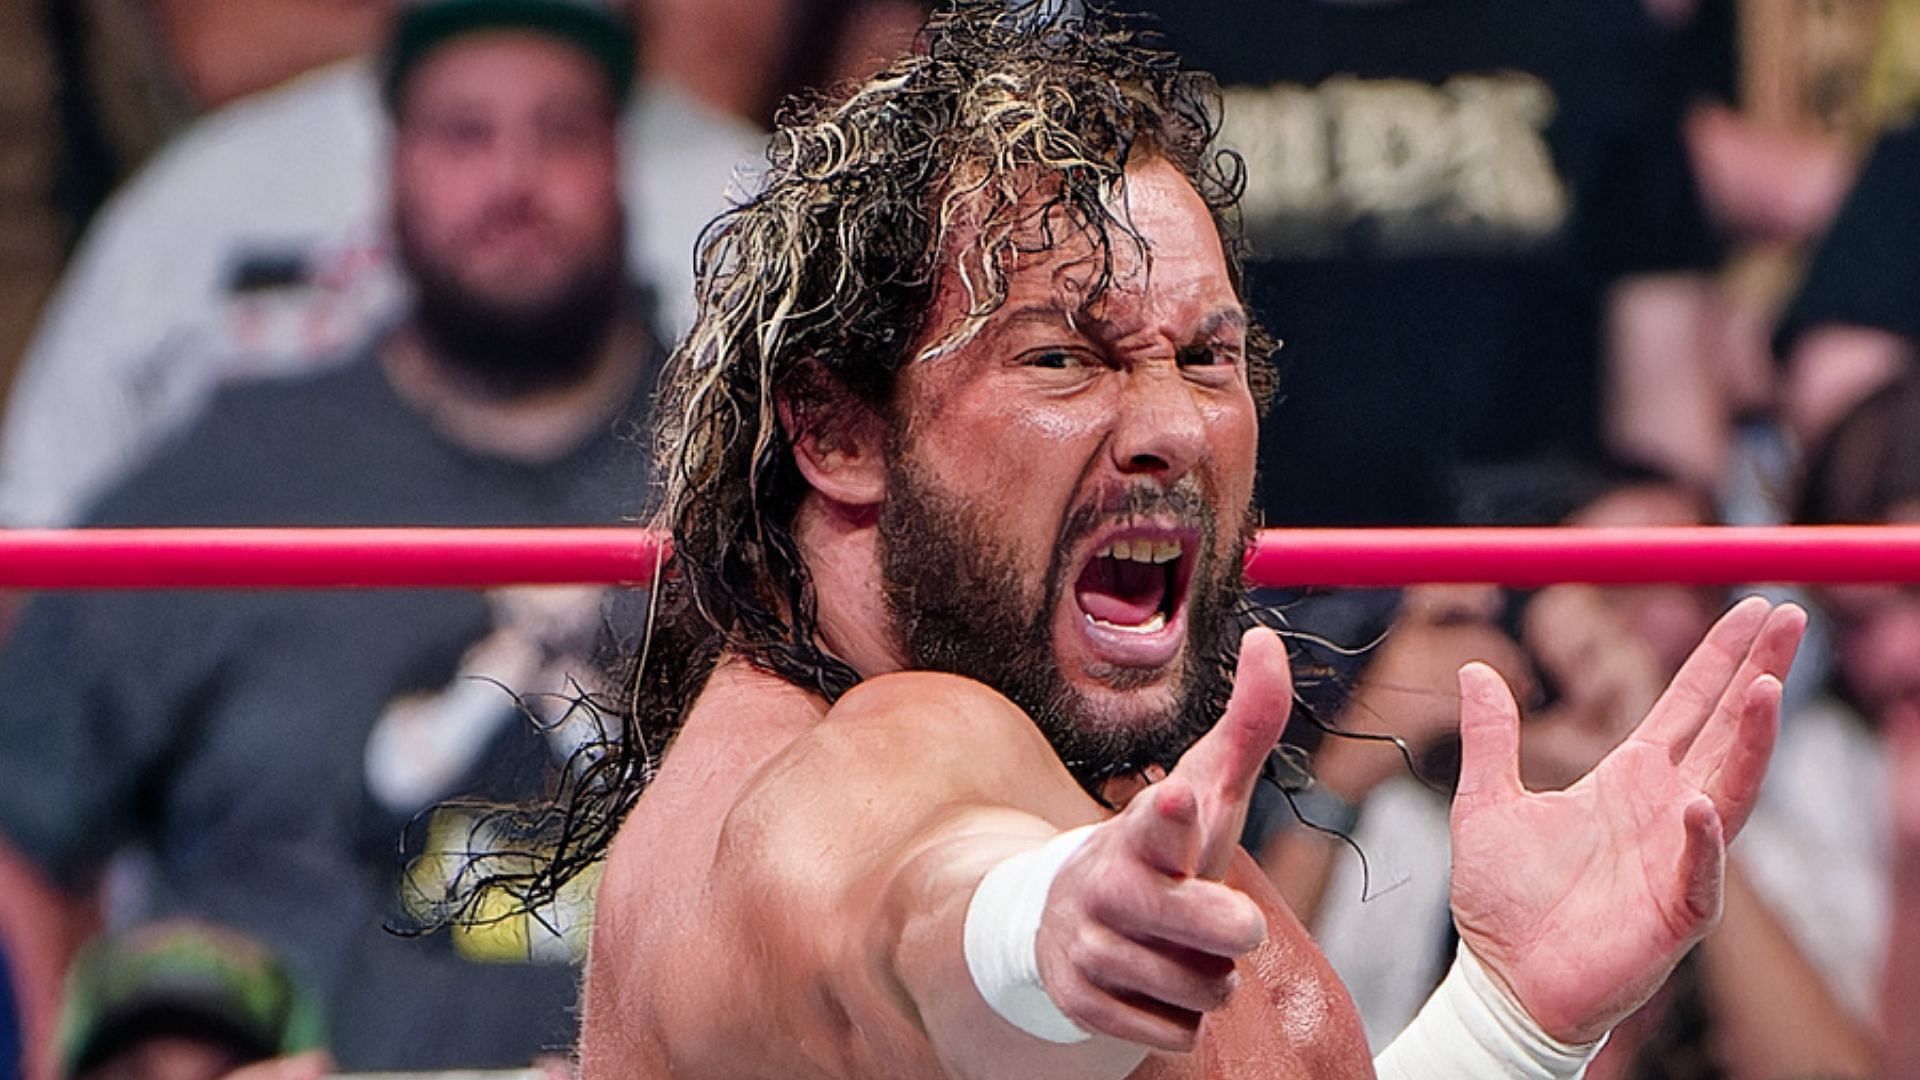 Kenny Omega has responded to a WWE Superstar